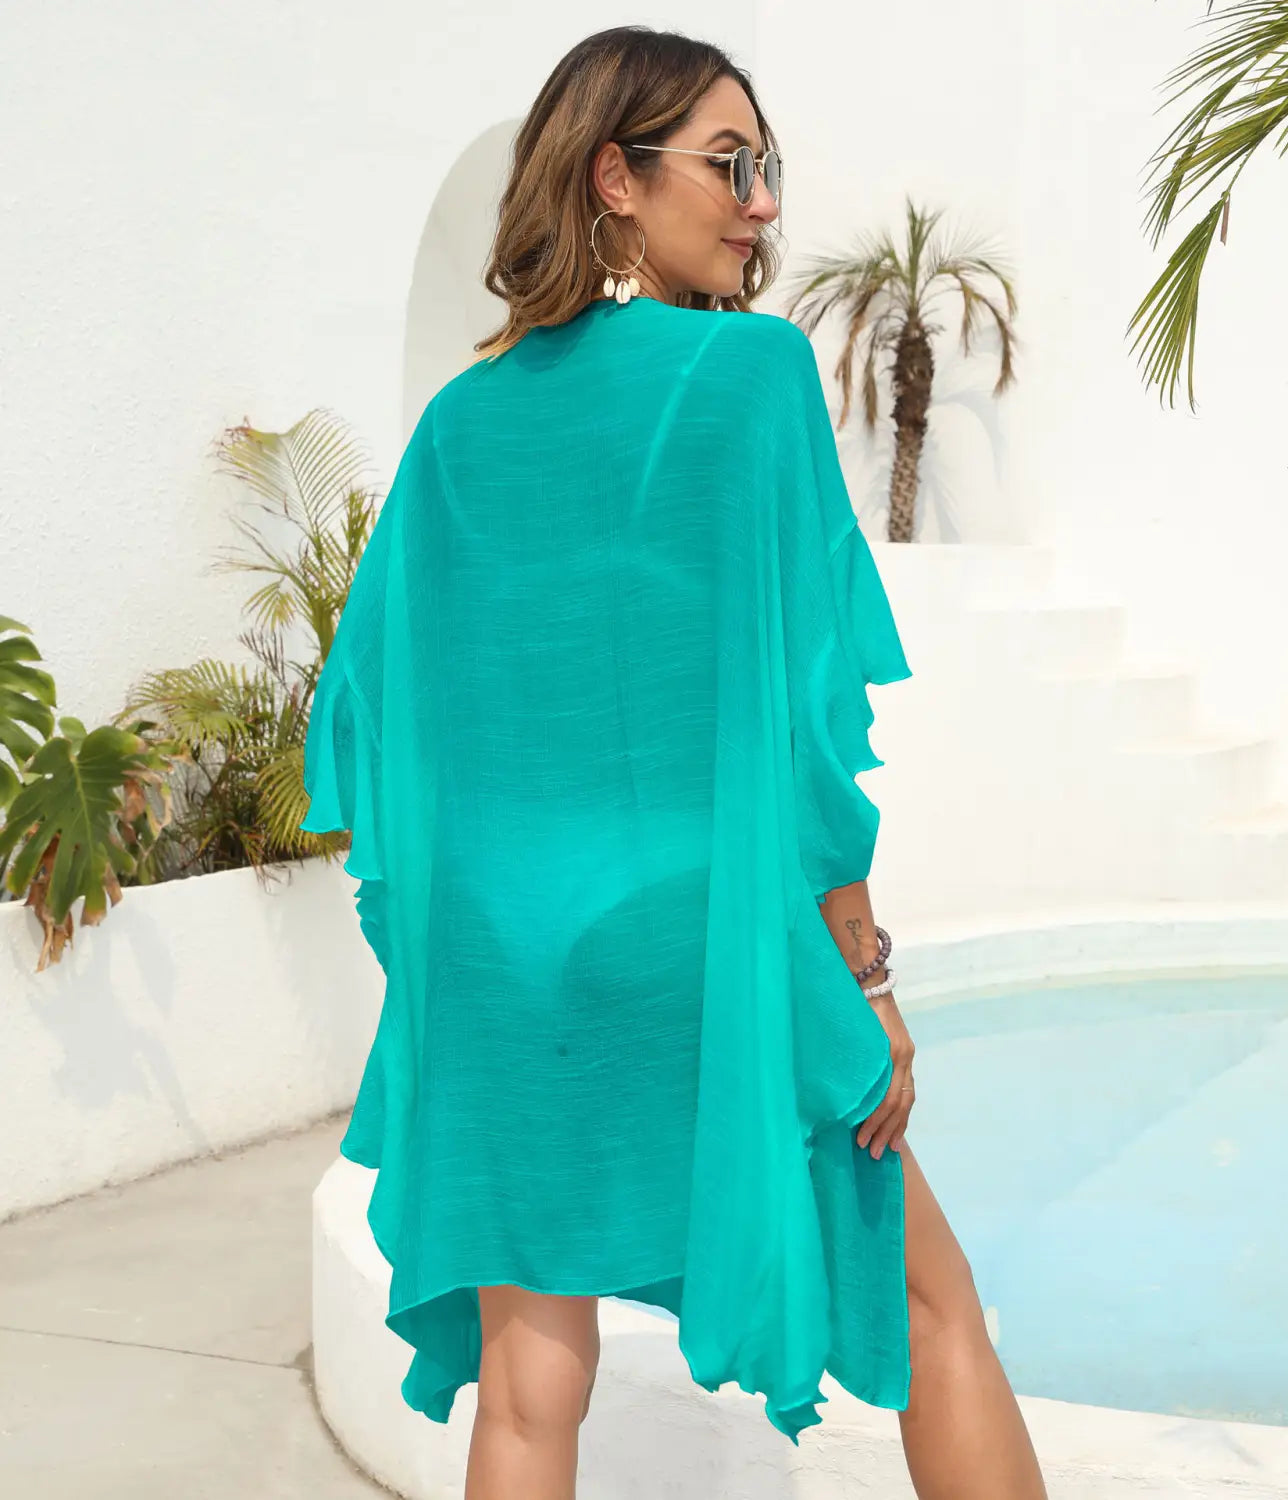 Boho Breeze Ruffle Cover-up - Your Summer Style Oasis!